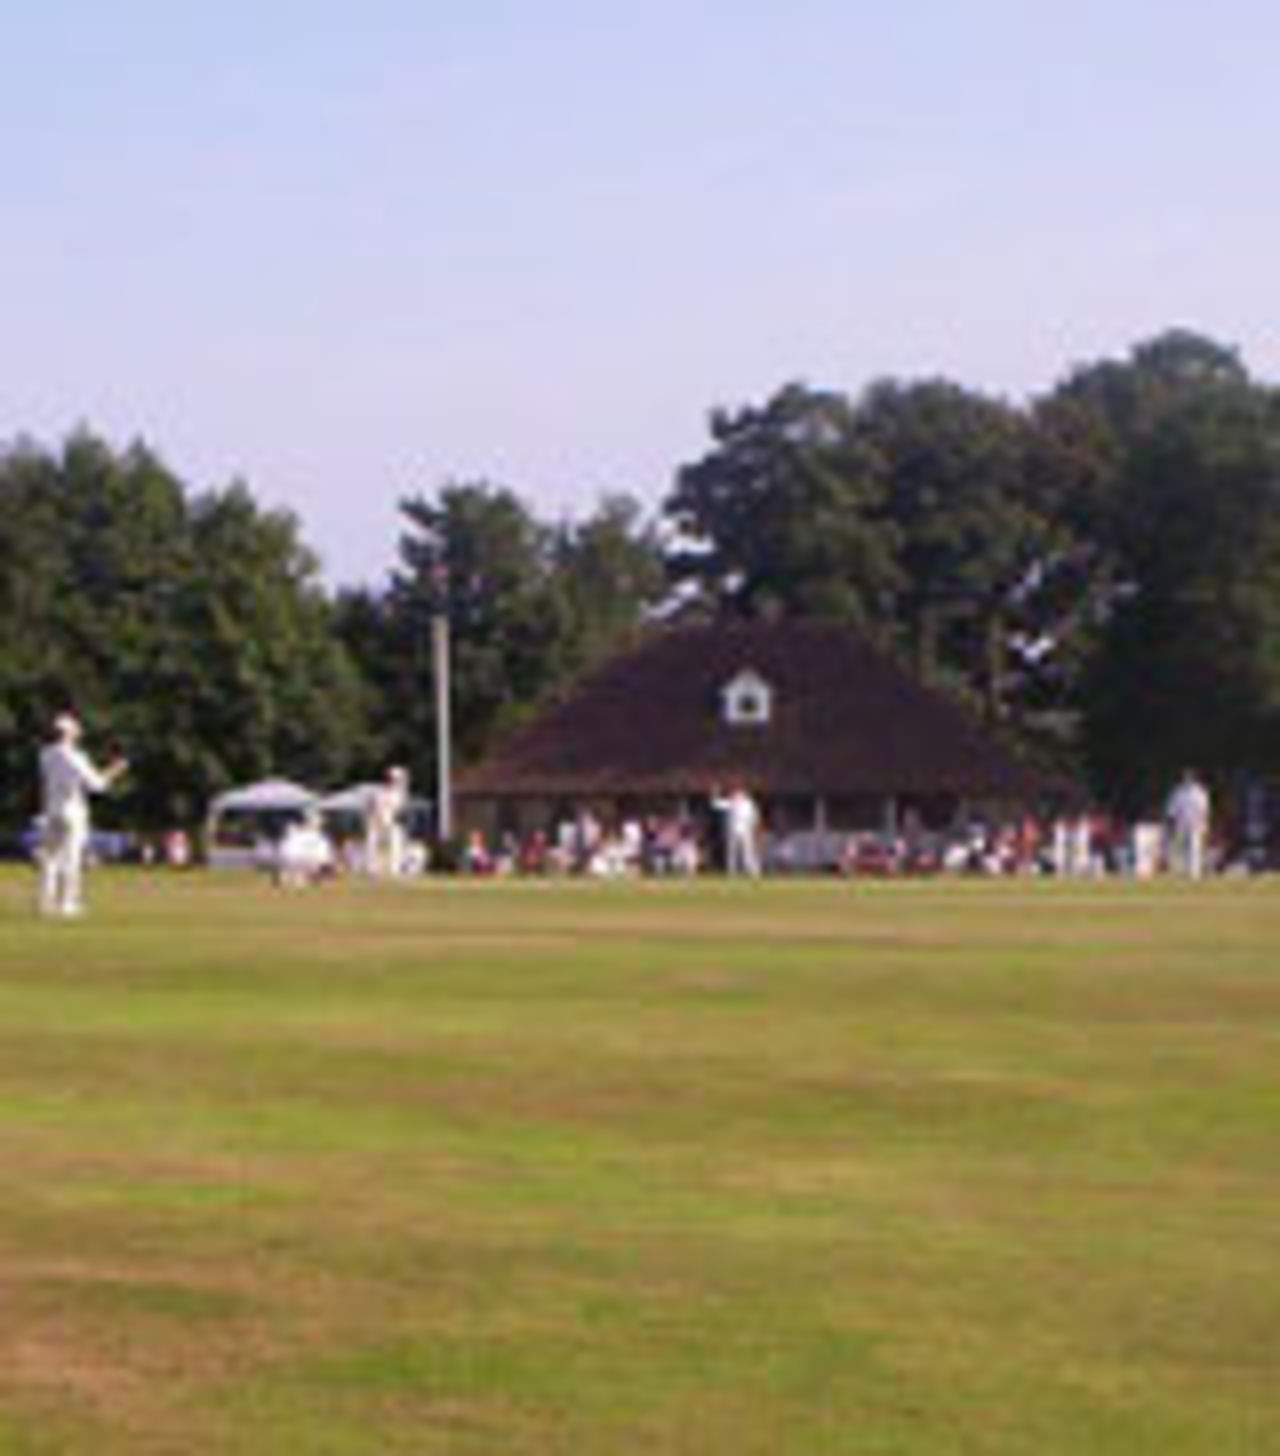 Zimbabwe's rebel cricketers play their last 'Red Lions' match at Cuckfield Cricket Club, July 30 2004